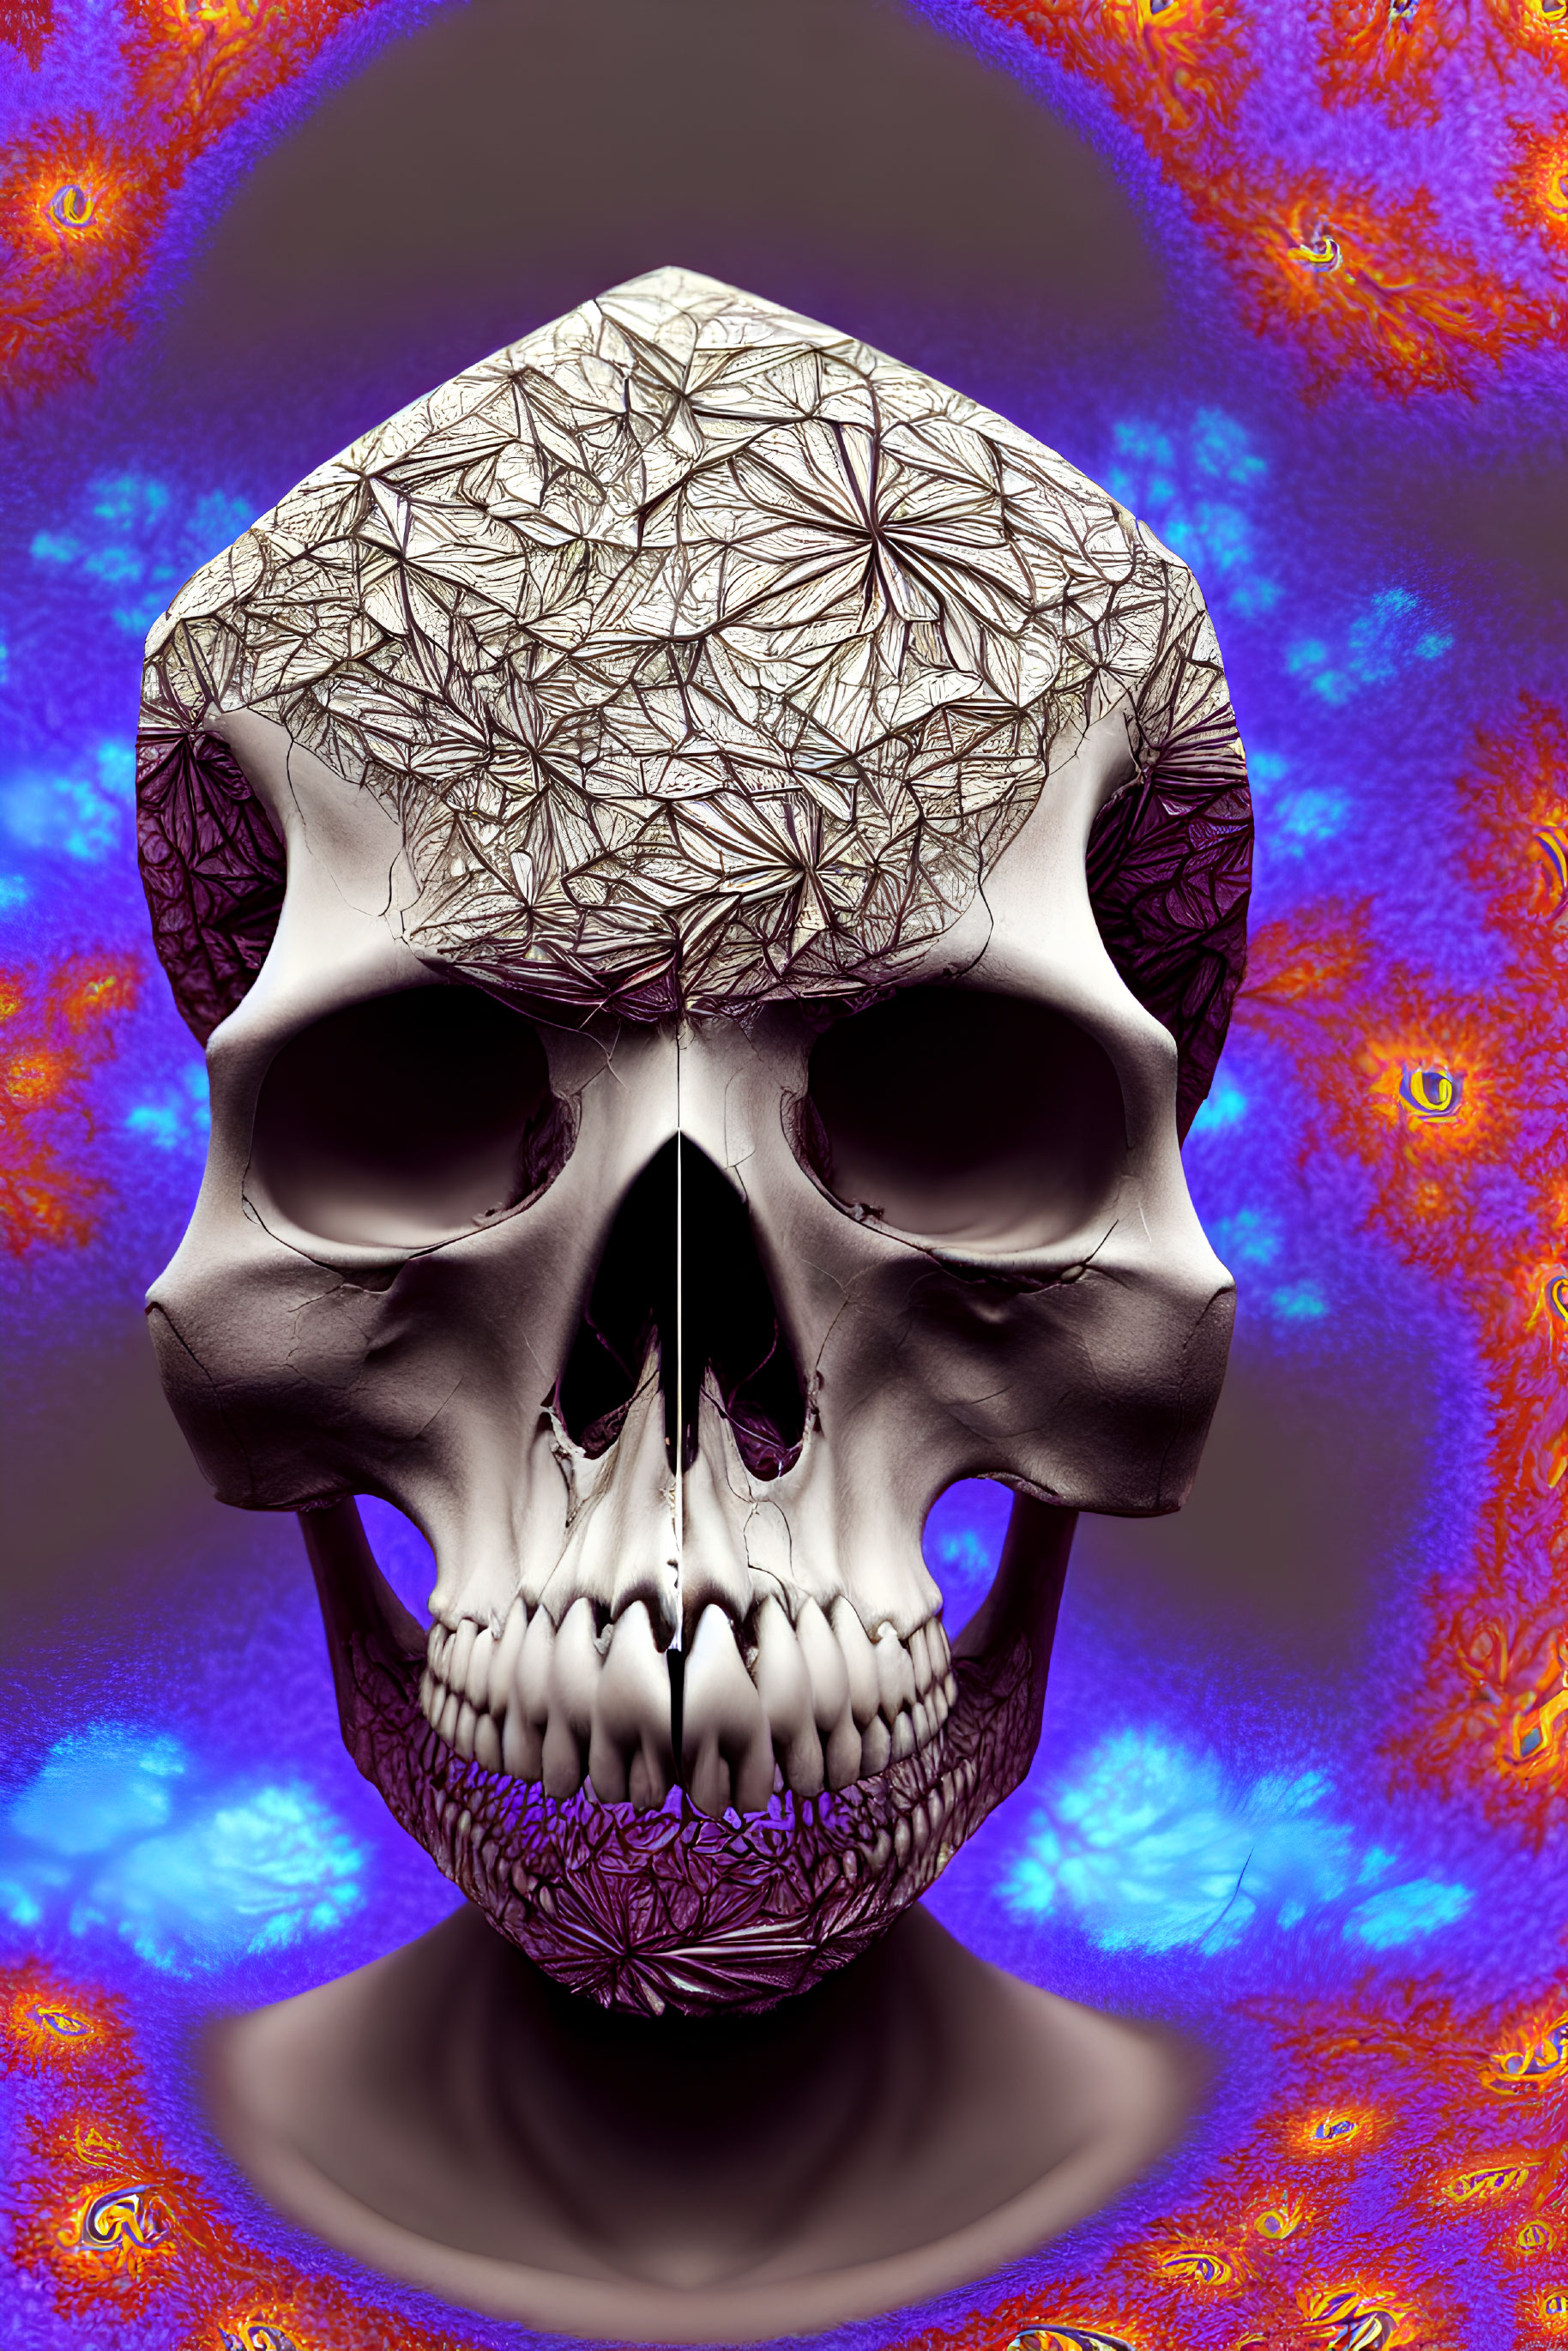 Silver Skull with Geometric Patterns on Psychedelic Background